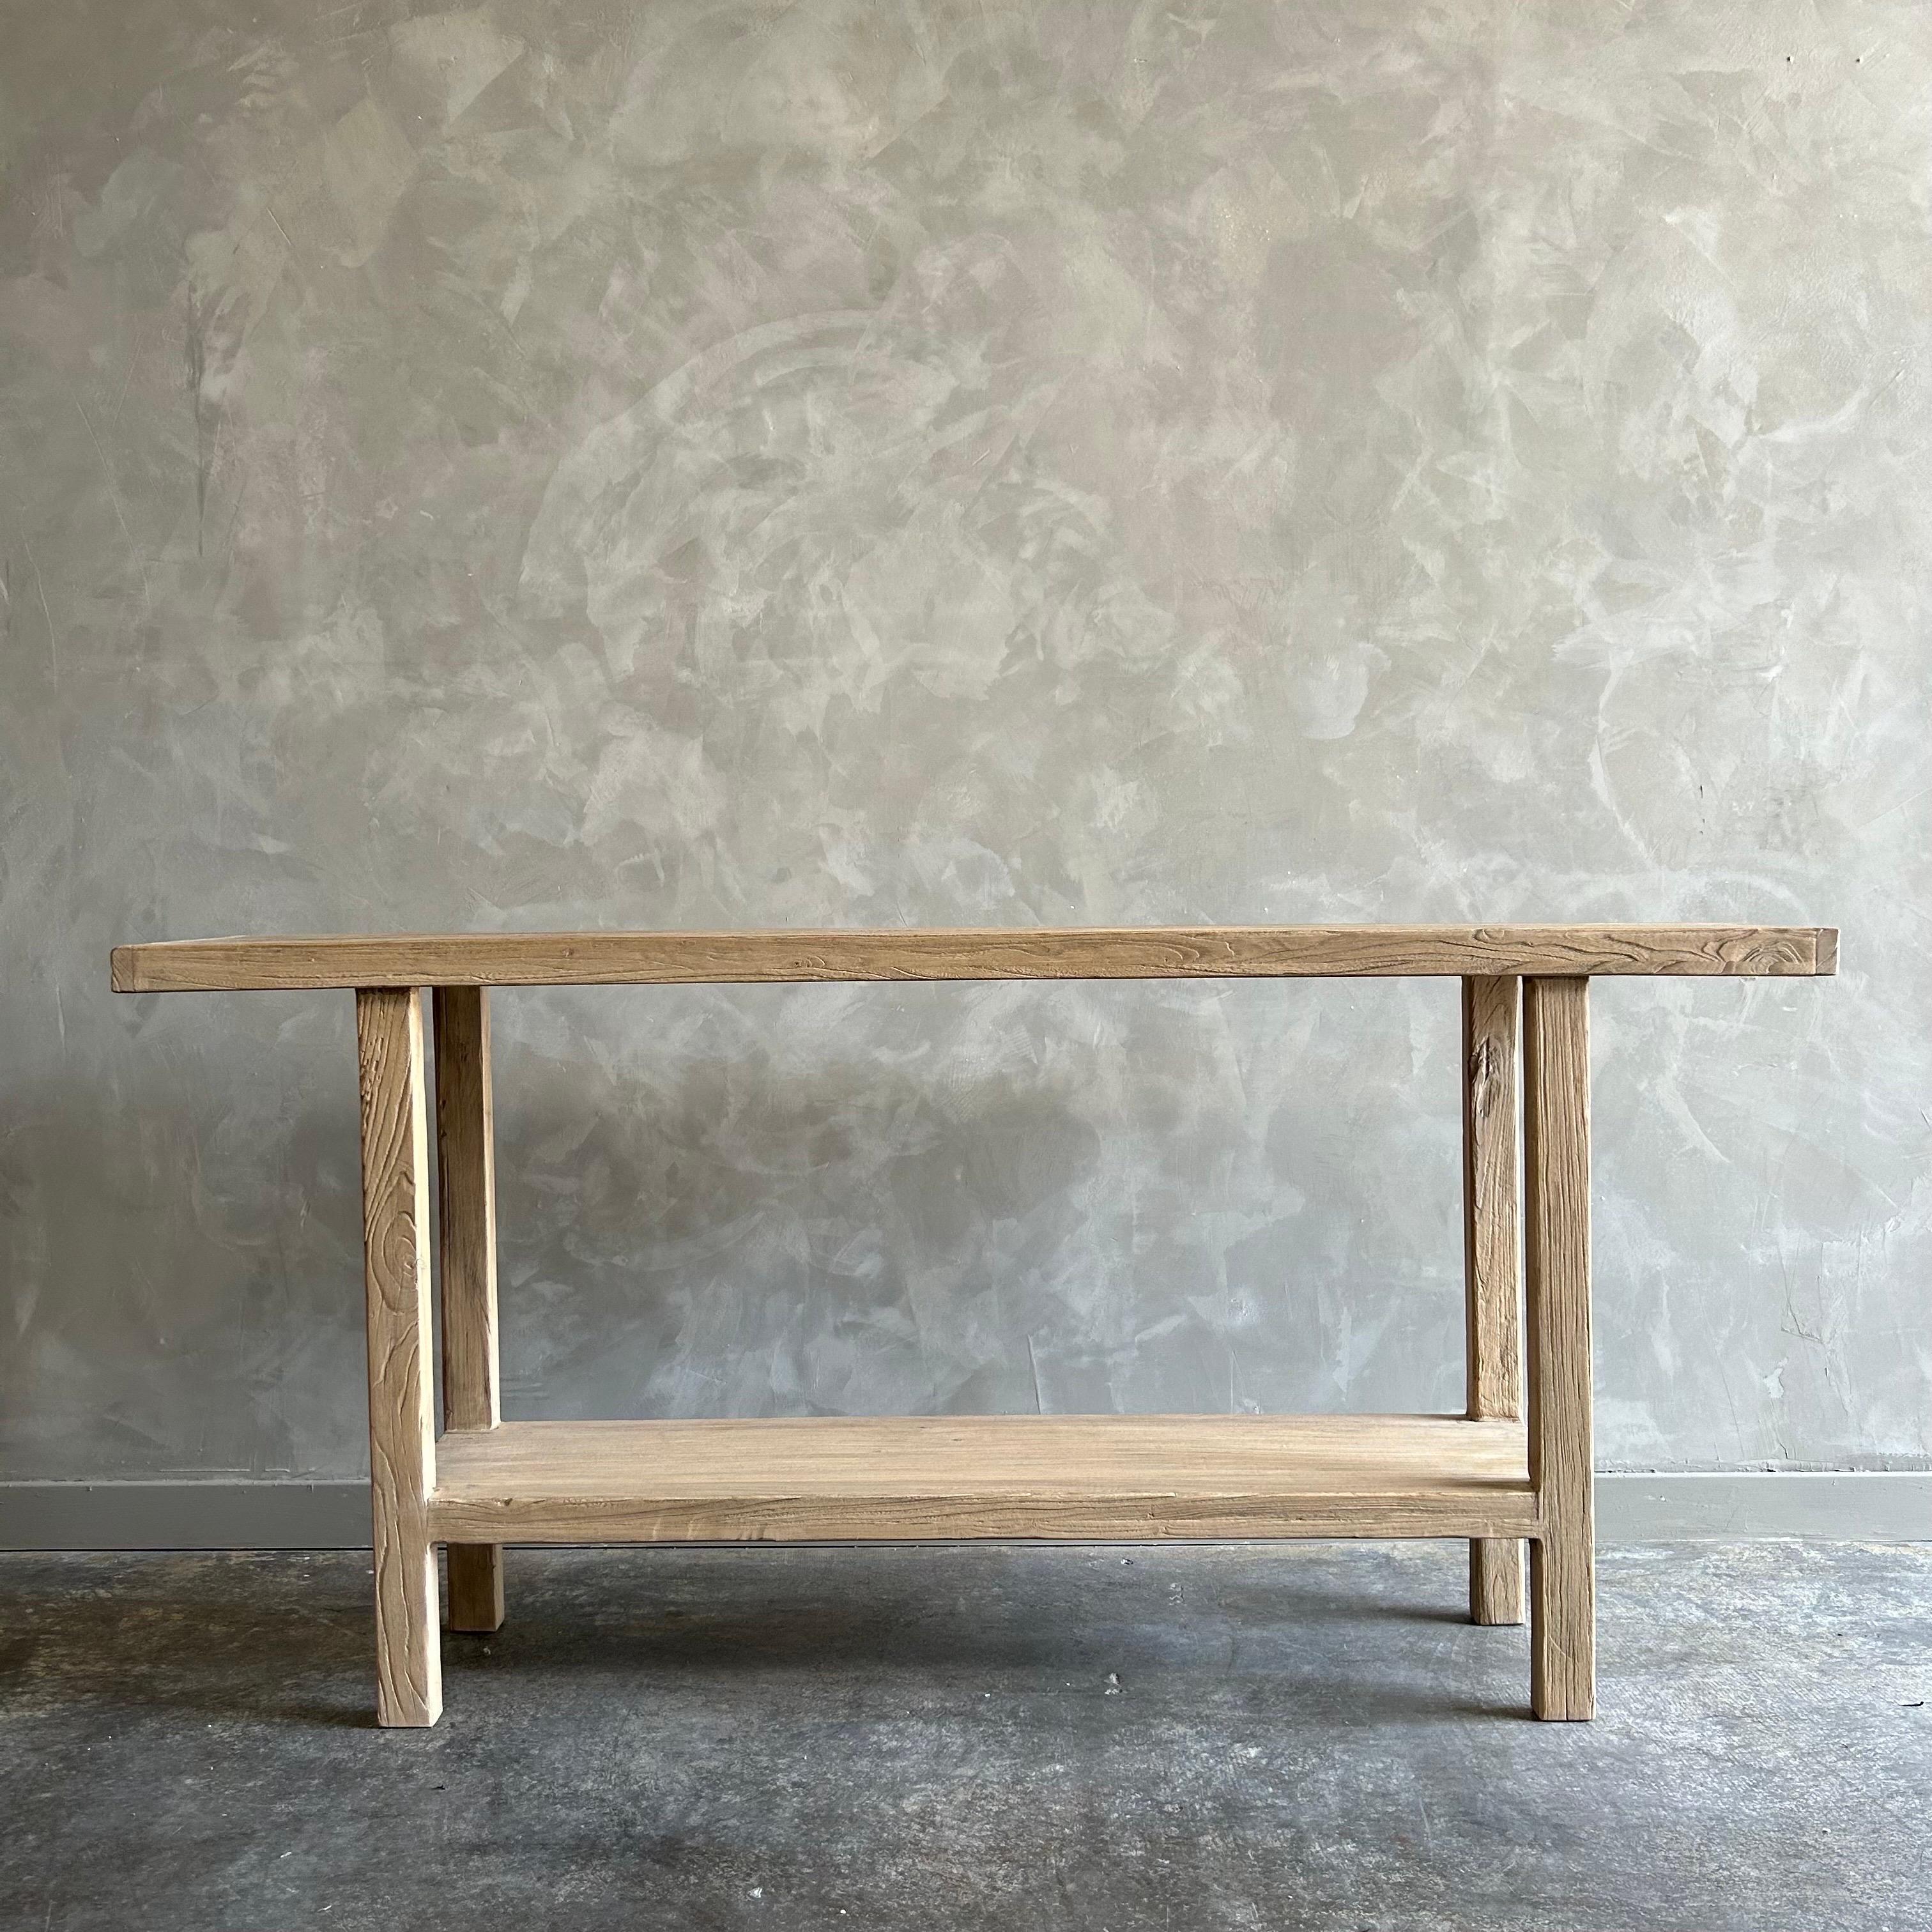 Bloom Home inc has over 2000 items in stock ready for immediate shipping, scroll down to view all of our items!
Elm console 71”w x 14”d x 33.5”h
One of a kind custom made Elm Wood Console Table Made from Vintage reclaimed elm wood. Beautiful